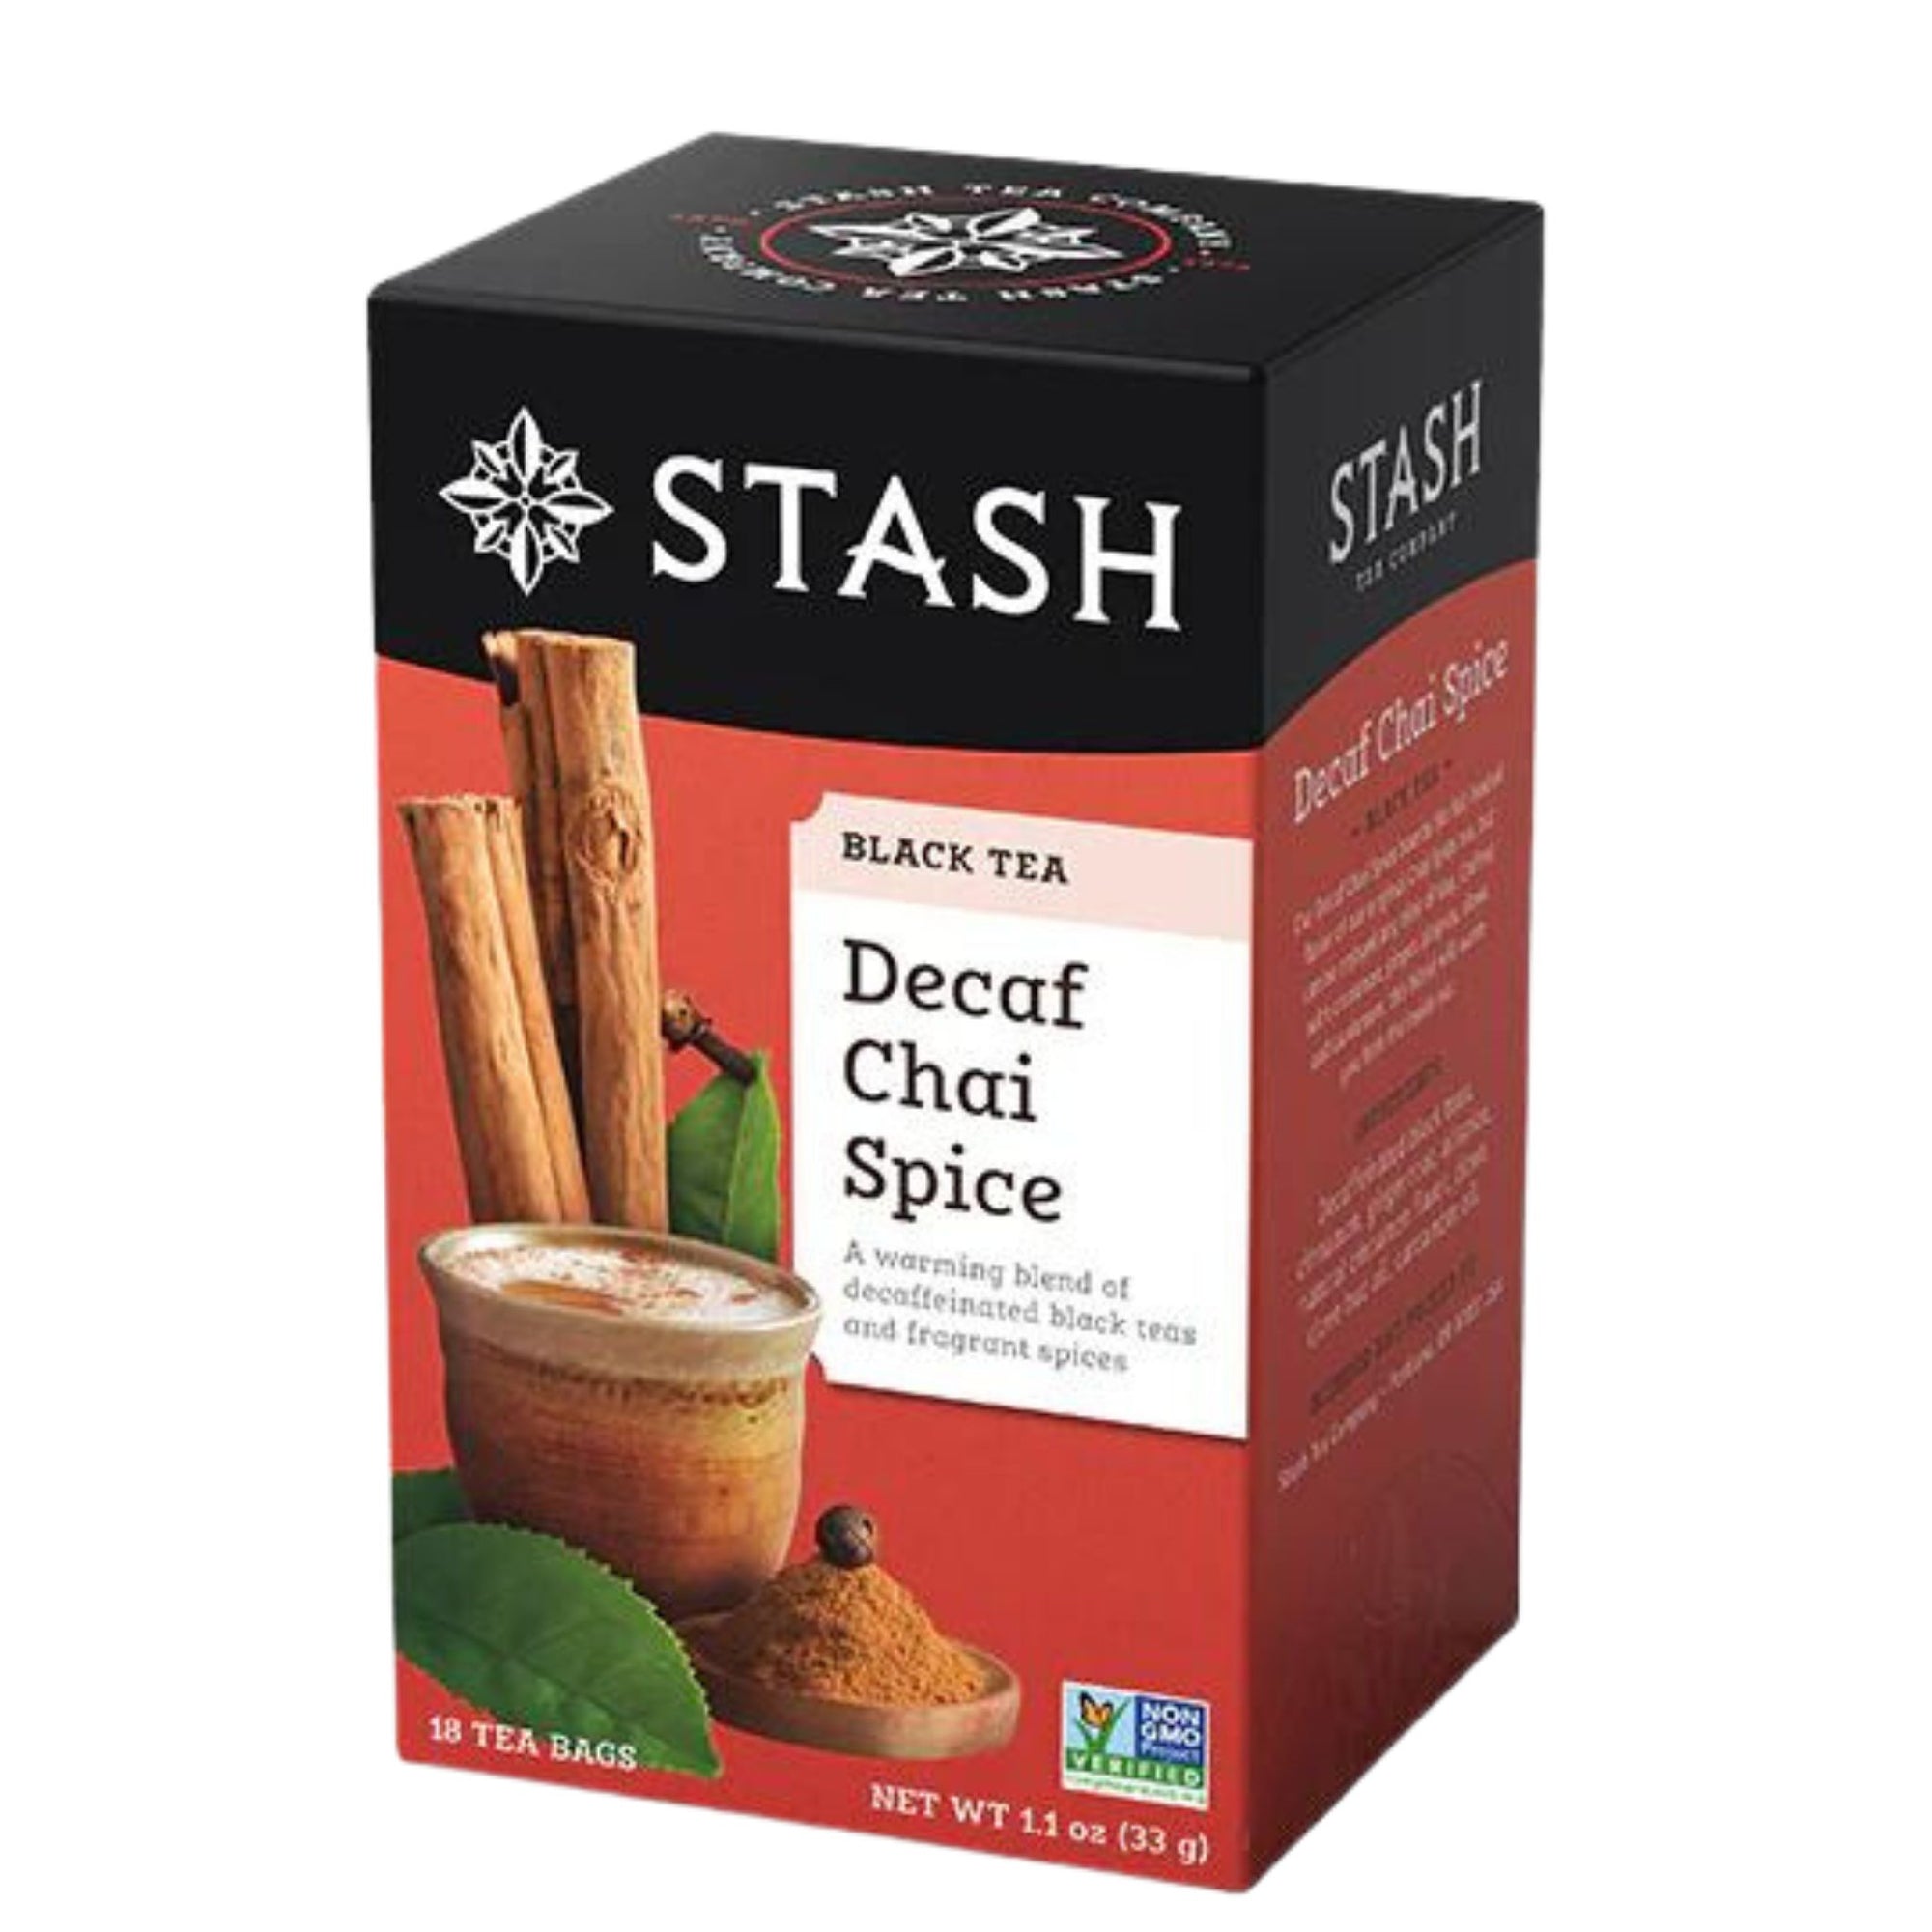 Stash Decaf Chai Spice Black Tea - 18 tea bags in a box - A warming blend of decaffeinated black teas and fragrant spices. 